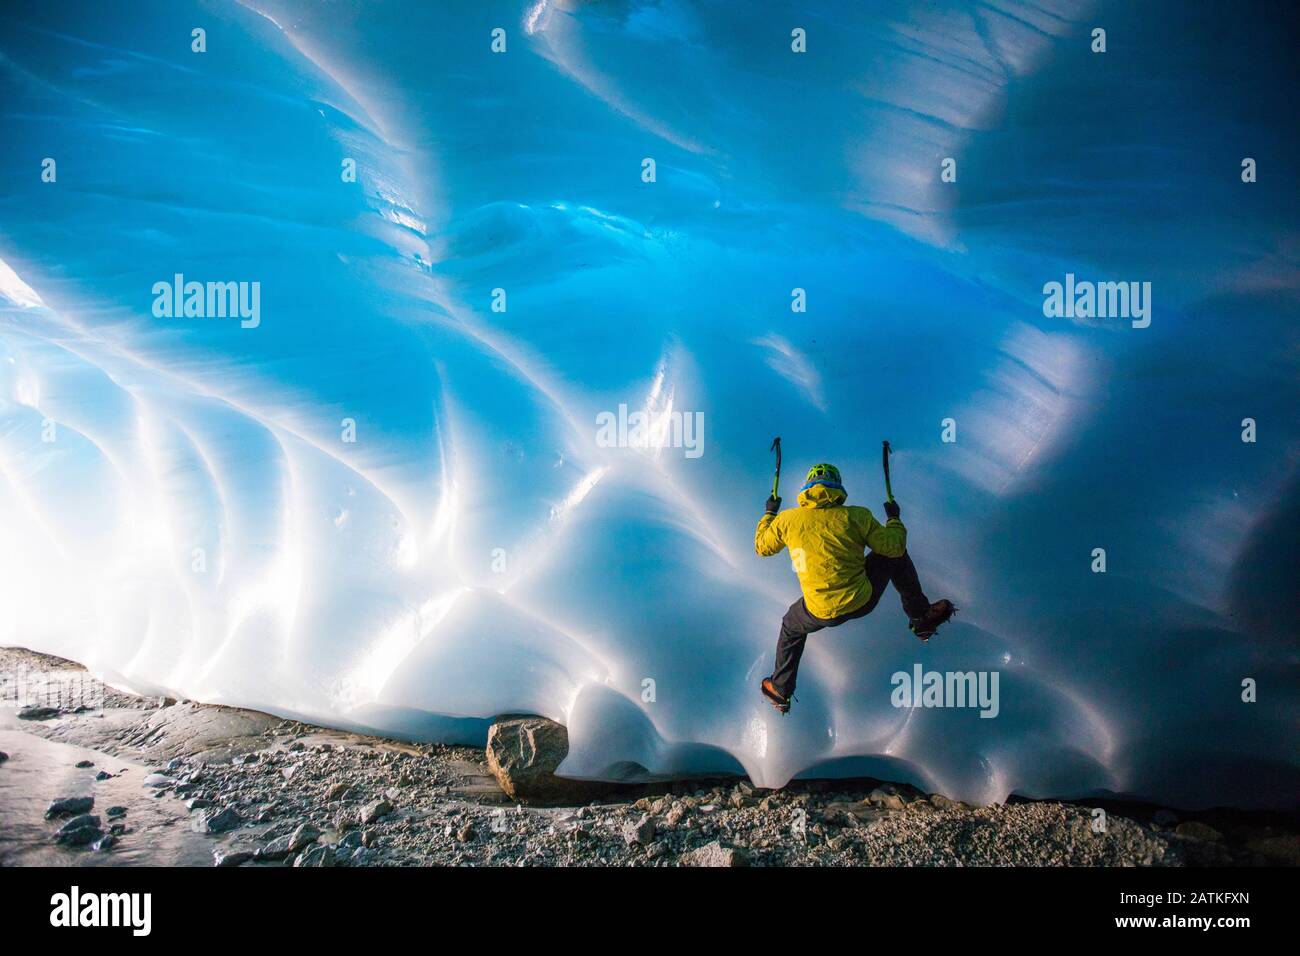 Mountaineer ice climbing on glacial ice in ice cave. Stock Photo